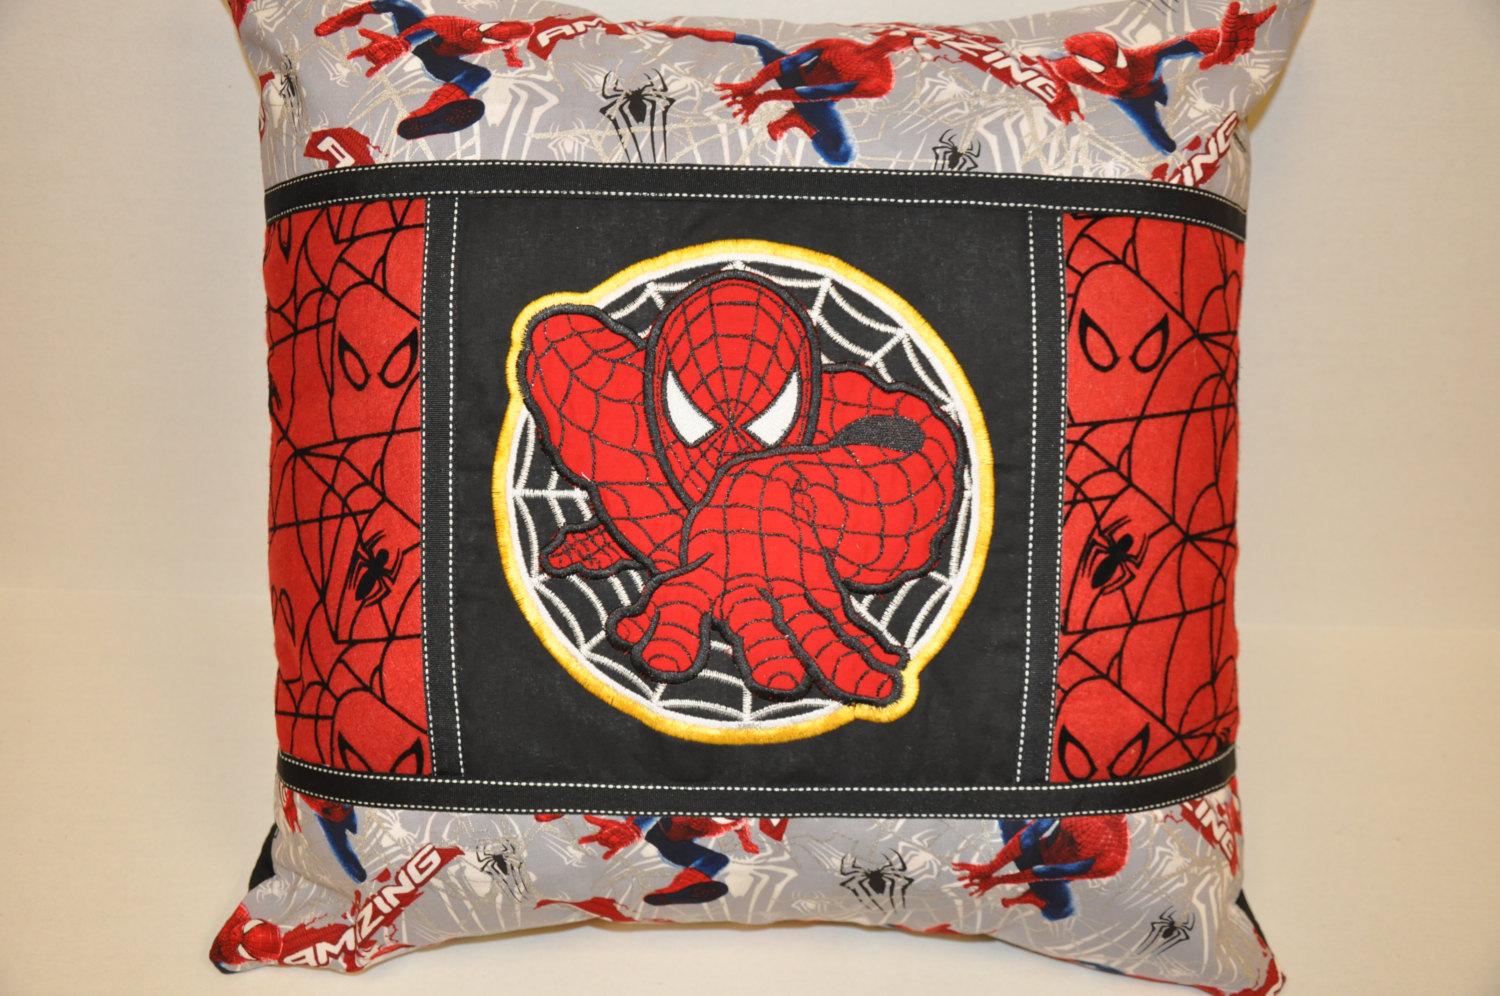 Pillow with Spider Man My Hero embroidery design